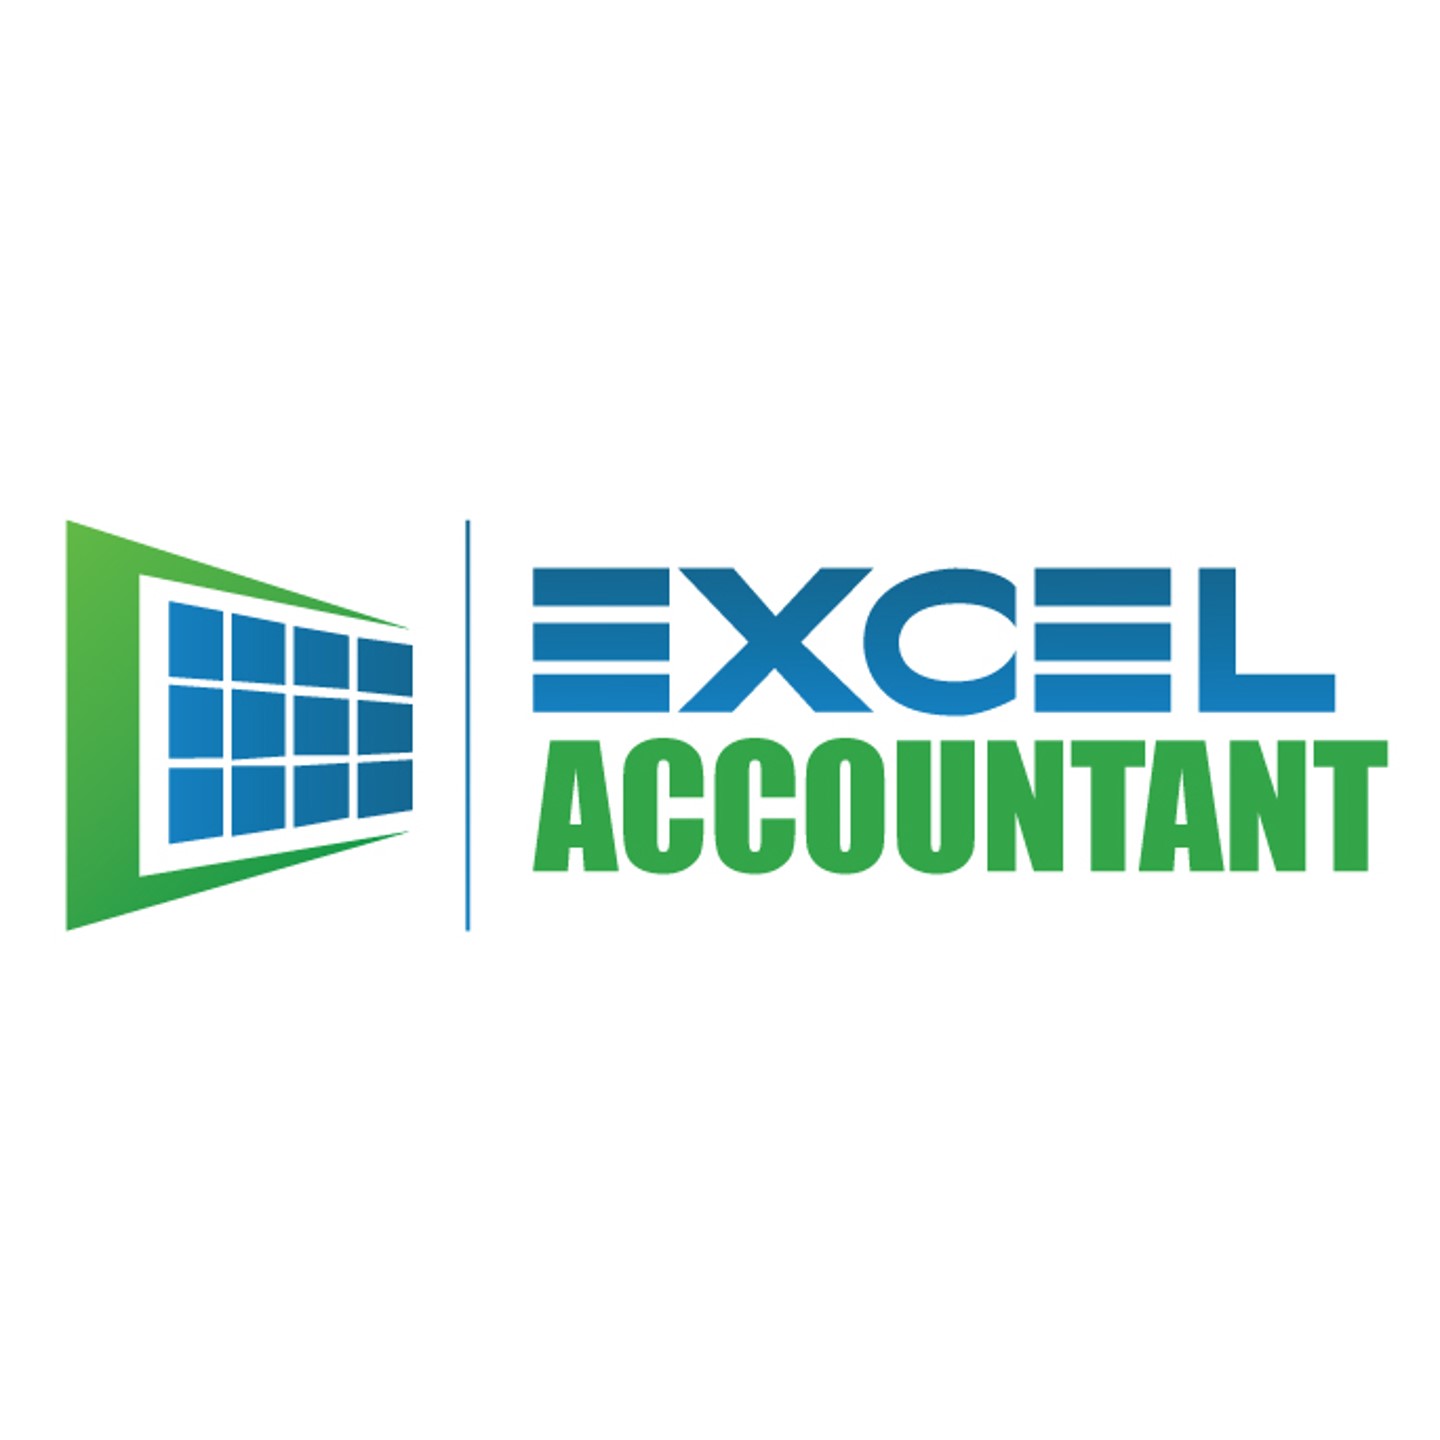 Excel Accountant